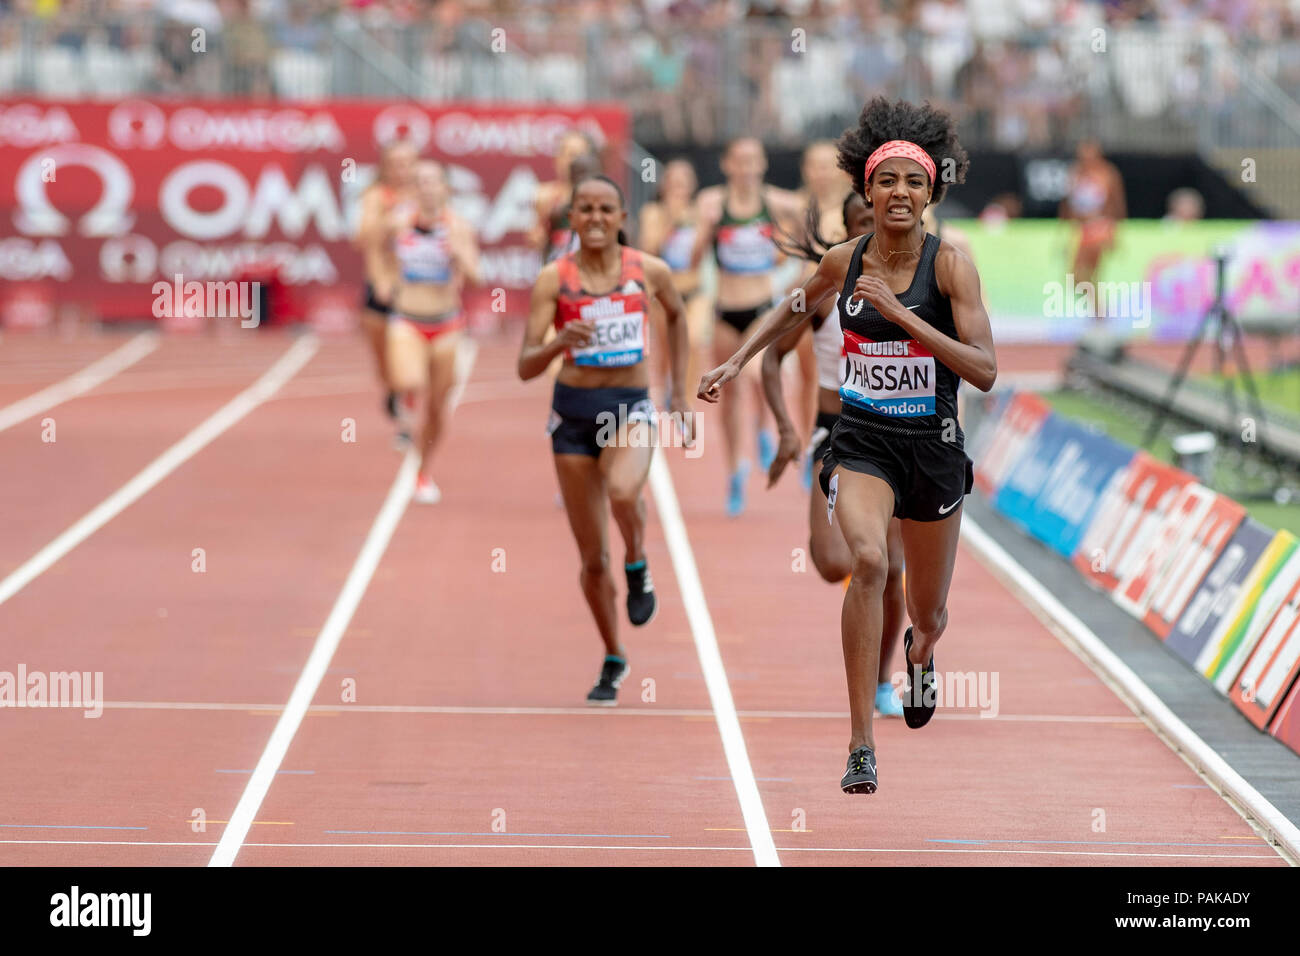 London, UK. 22nd July 2018. Sifan Hassan (NED) won the Millicent Fawcett Mile in 4:14.71 at the Muller Anniversary Games at the London Stadium, London, Great Britiain, on 22 July 2018. Credit: Andrew Peat/Alamy Live News Stock Photo